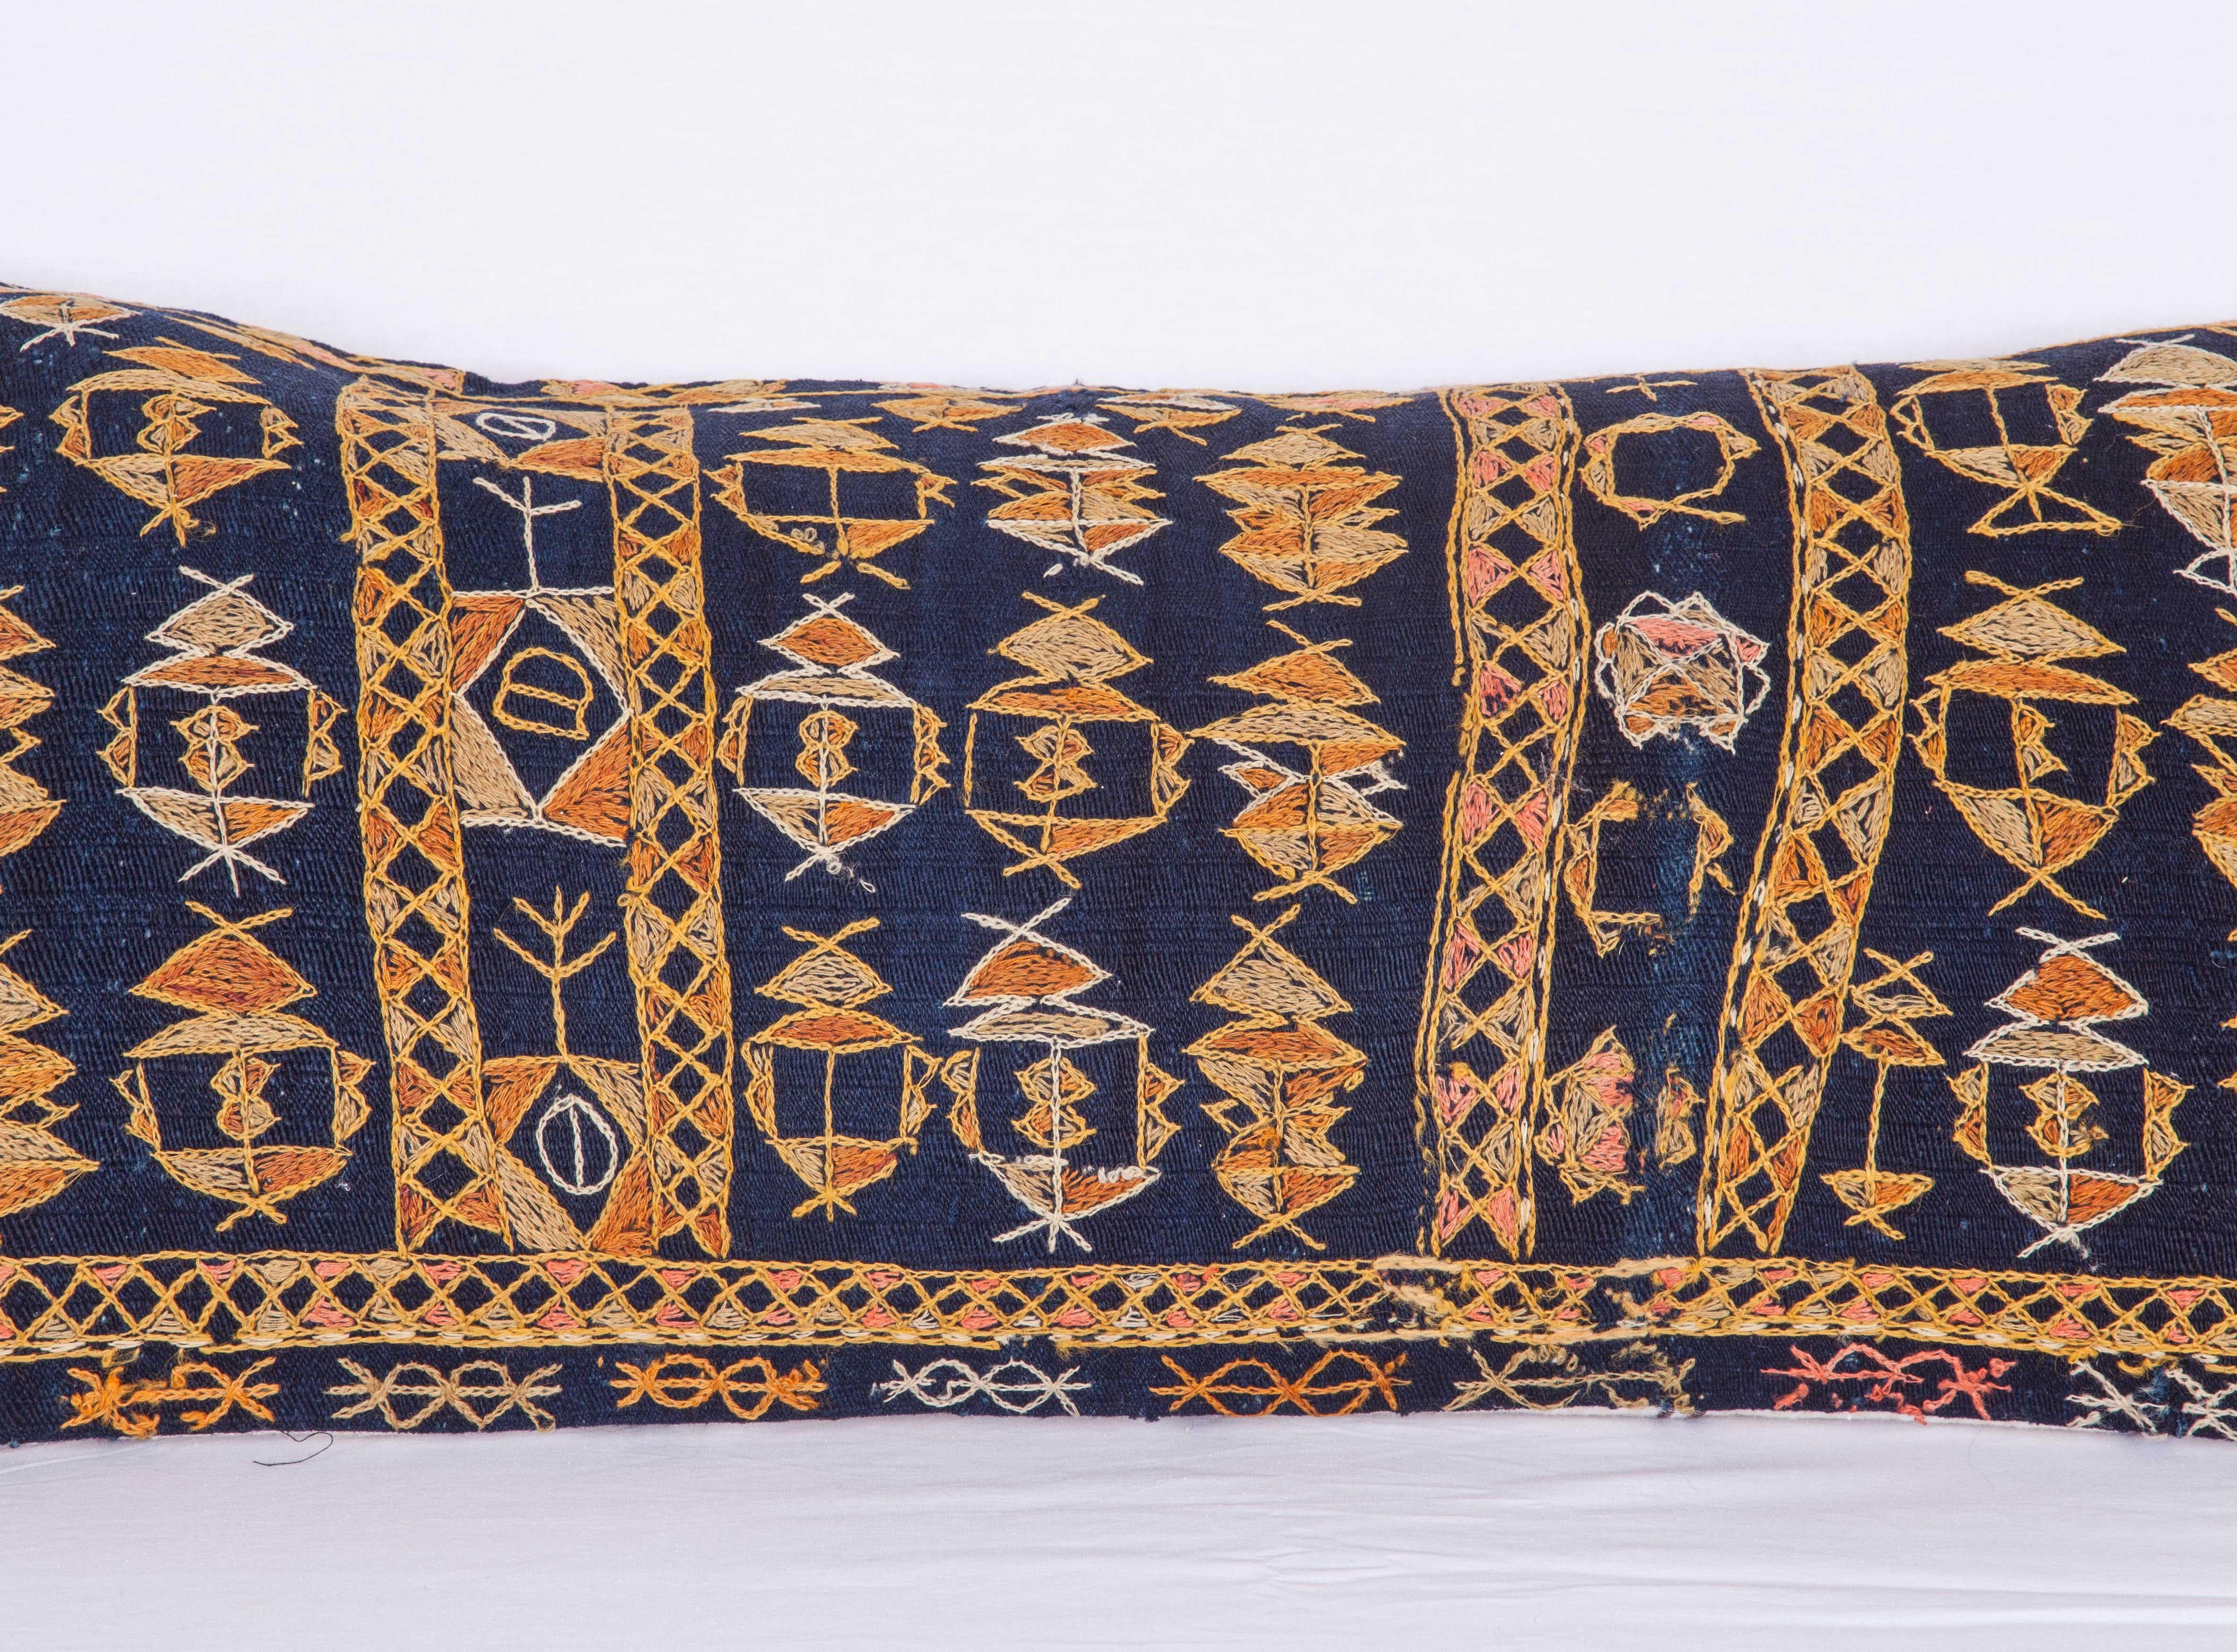 Pillow case made from an antique Kurdish Kilim with indigo color background. It does not come with an insert but it comes with a bag made to the size and out of cotton to accommodate the filling. The backing is made of linen. Please note 'filling is